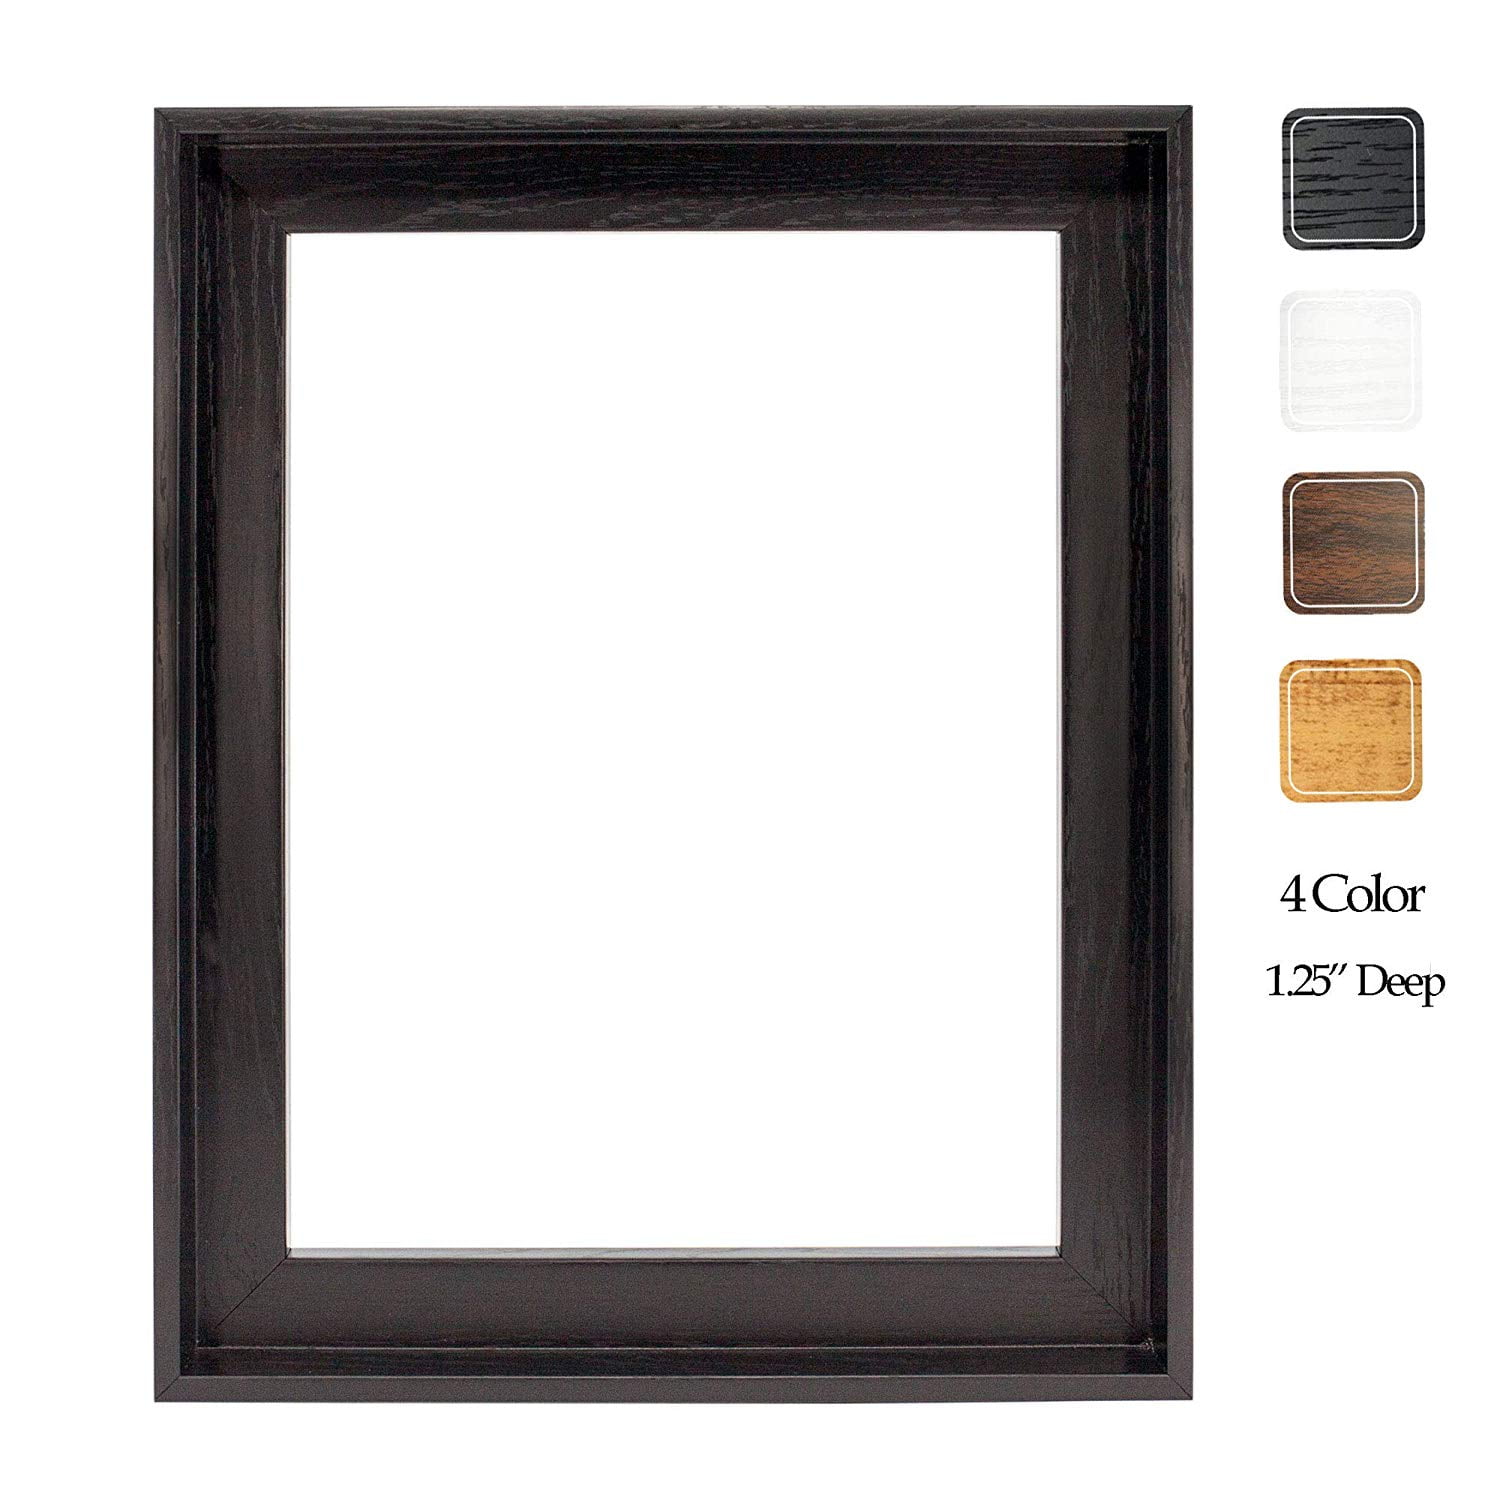 1-1/4-Inch Wide with Real Glass 16x20 White Picture Frame 